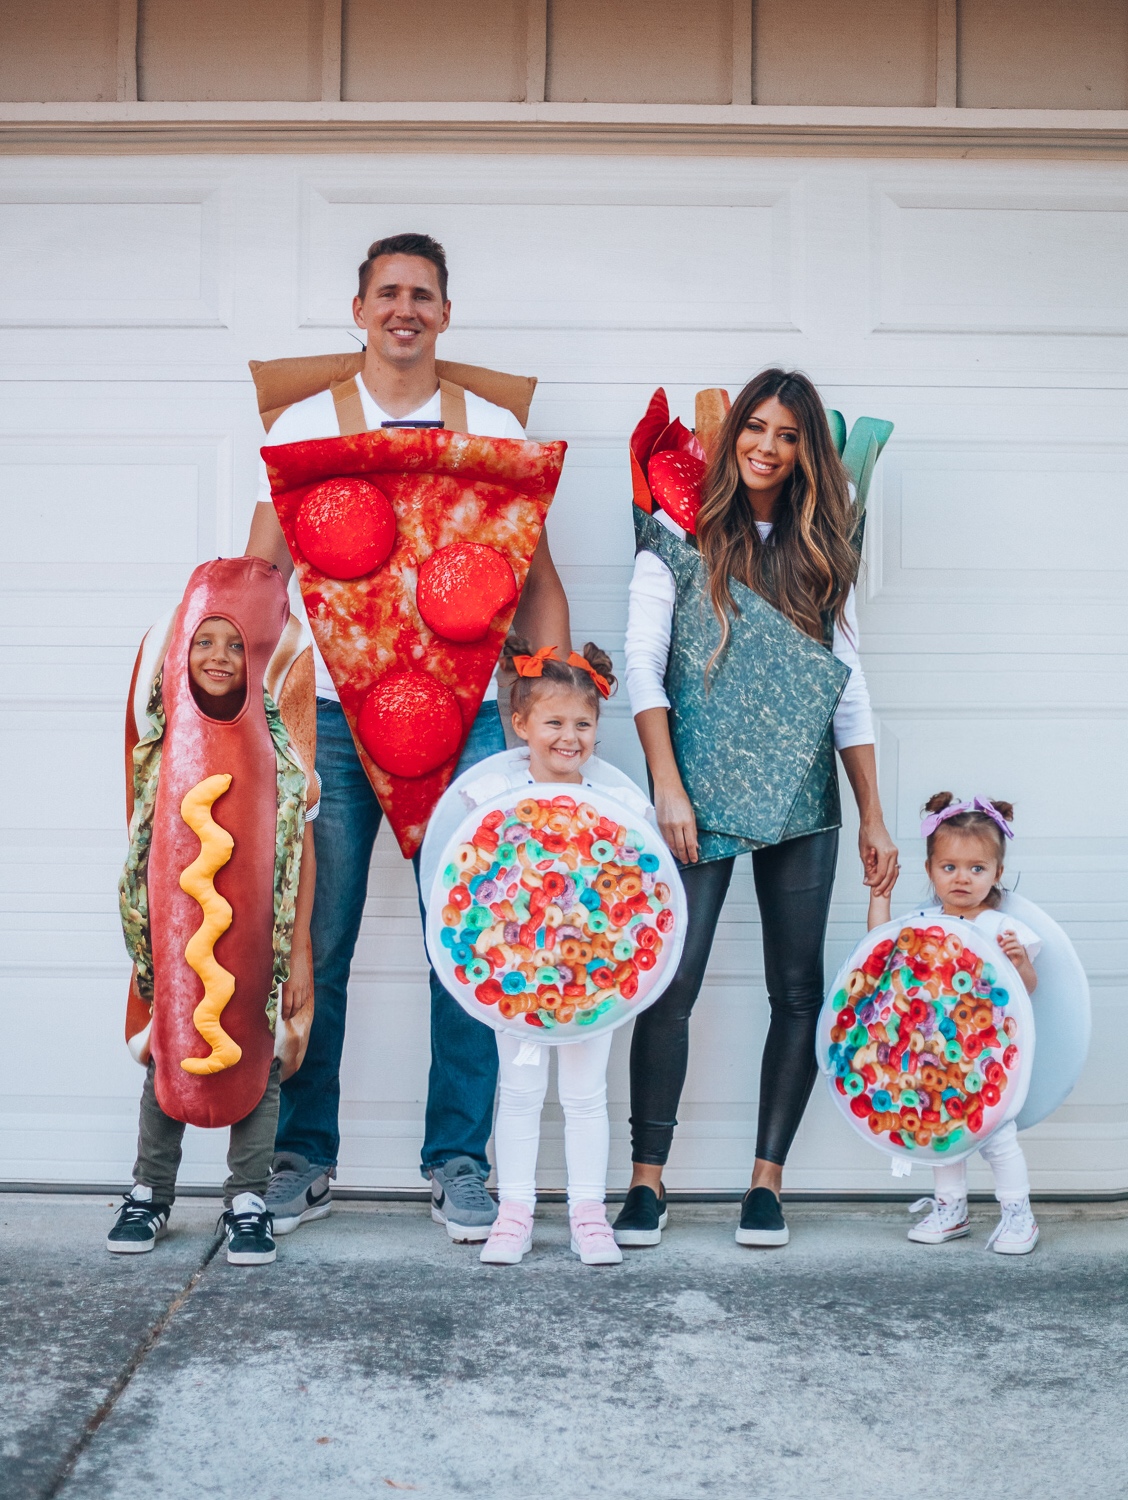 Family Halloween Costumes Spooky: Get Ready to Scare!